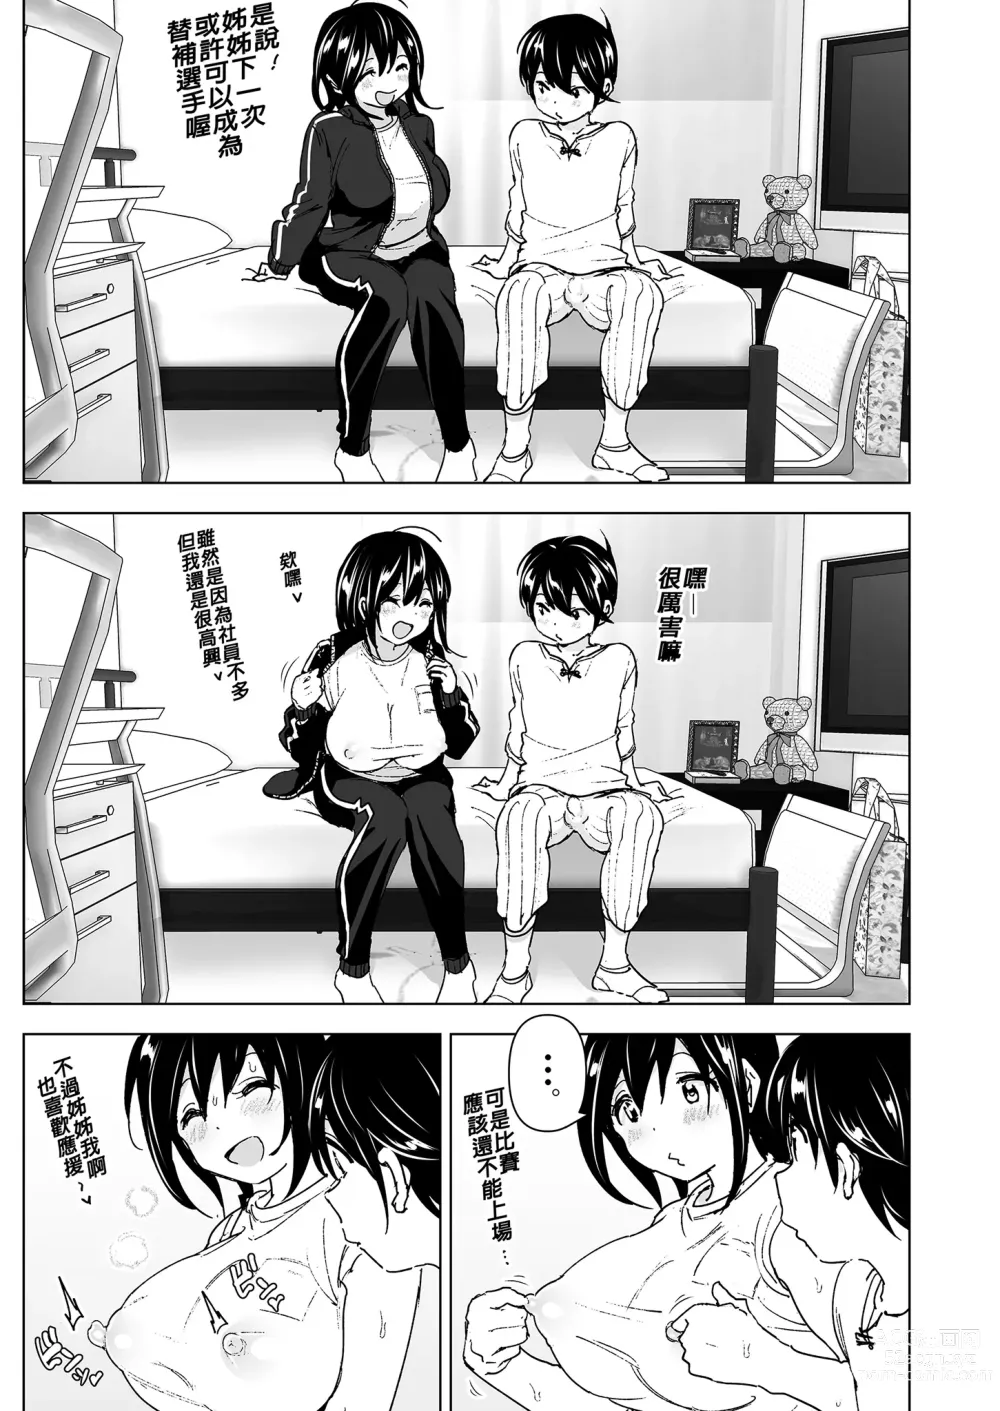 Page 35 of doujinshi 姊姊與傾聽怨言的弟弟